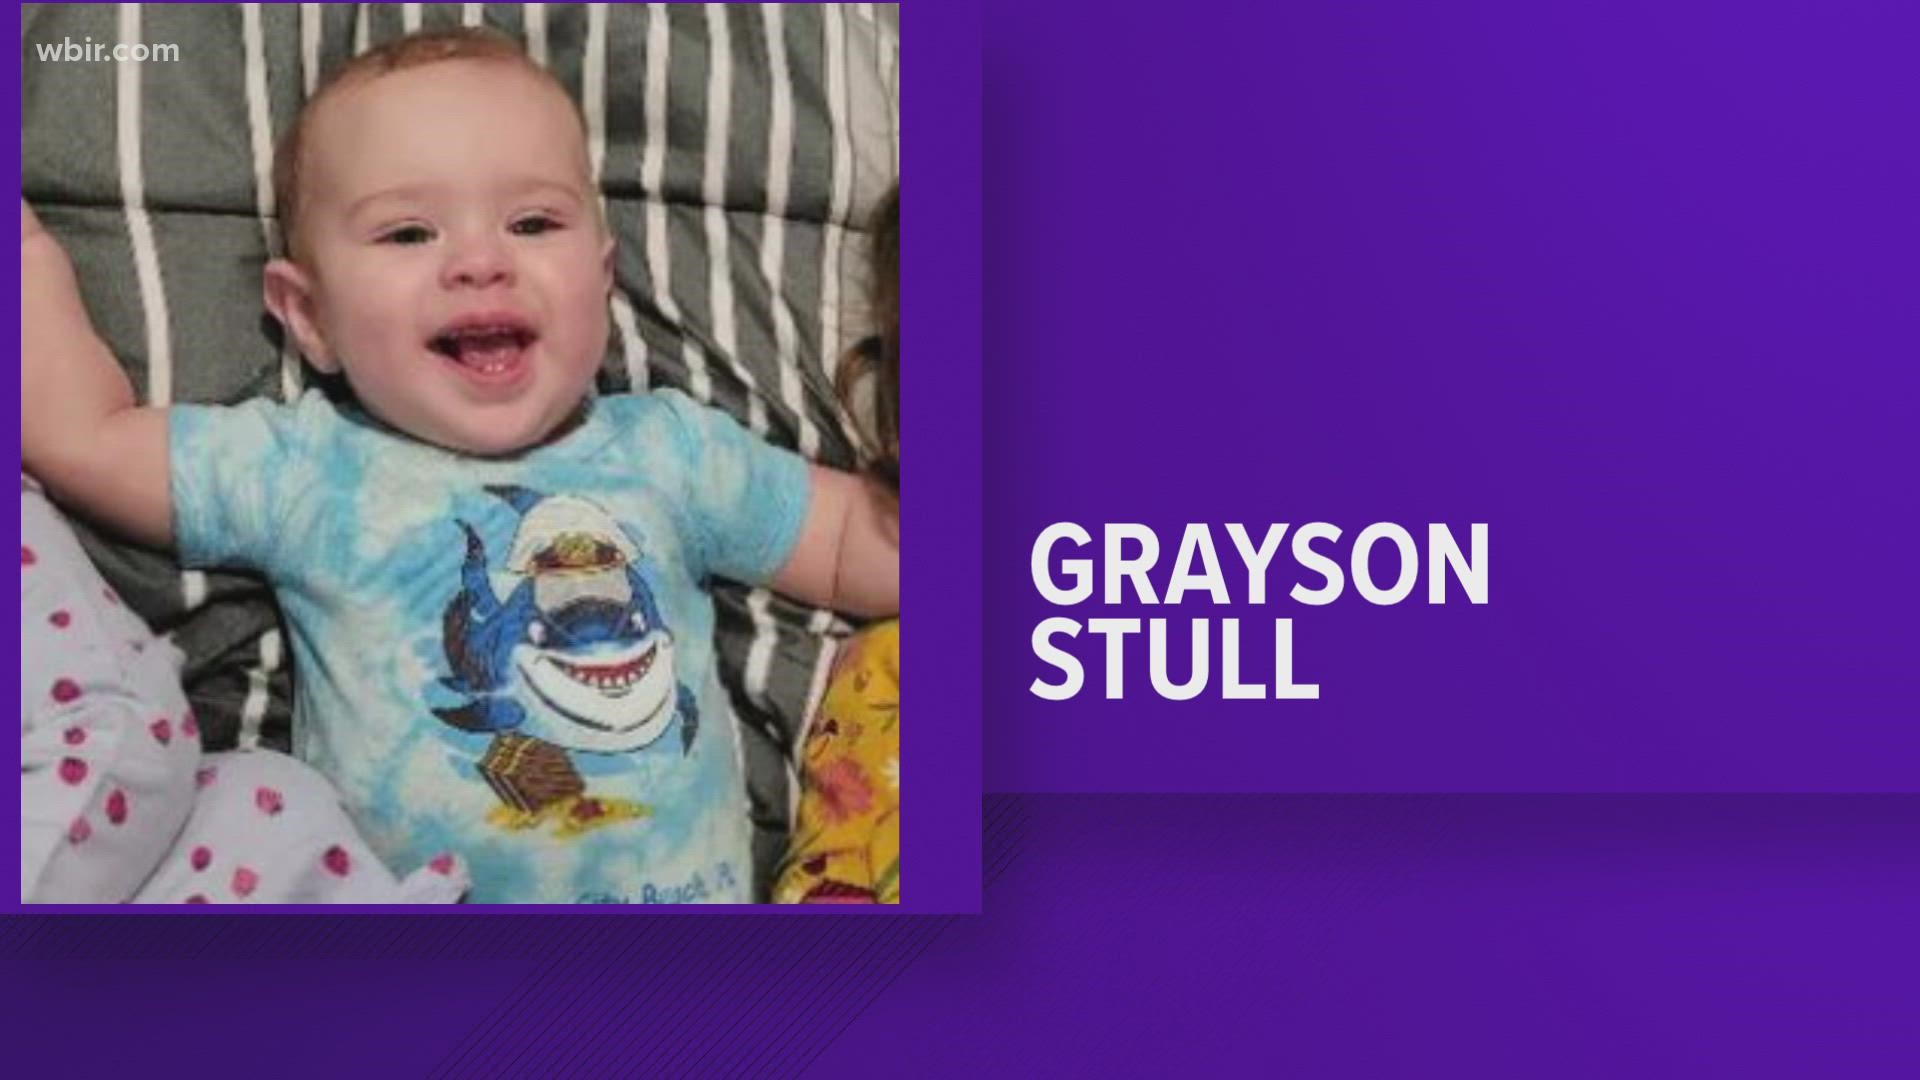 Grayson Stull had been hospitalized at Vanderbilt Medical Center after a house fire on June 6.